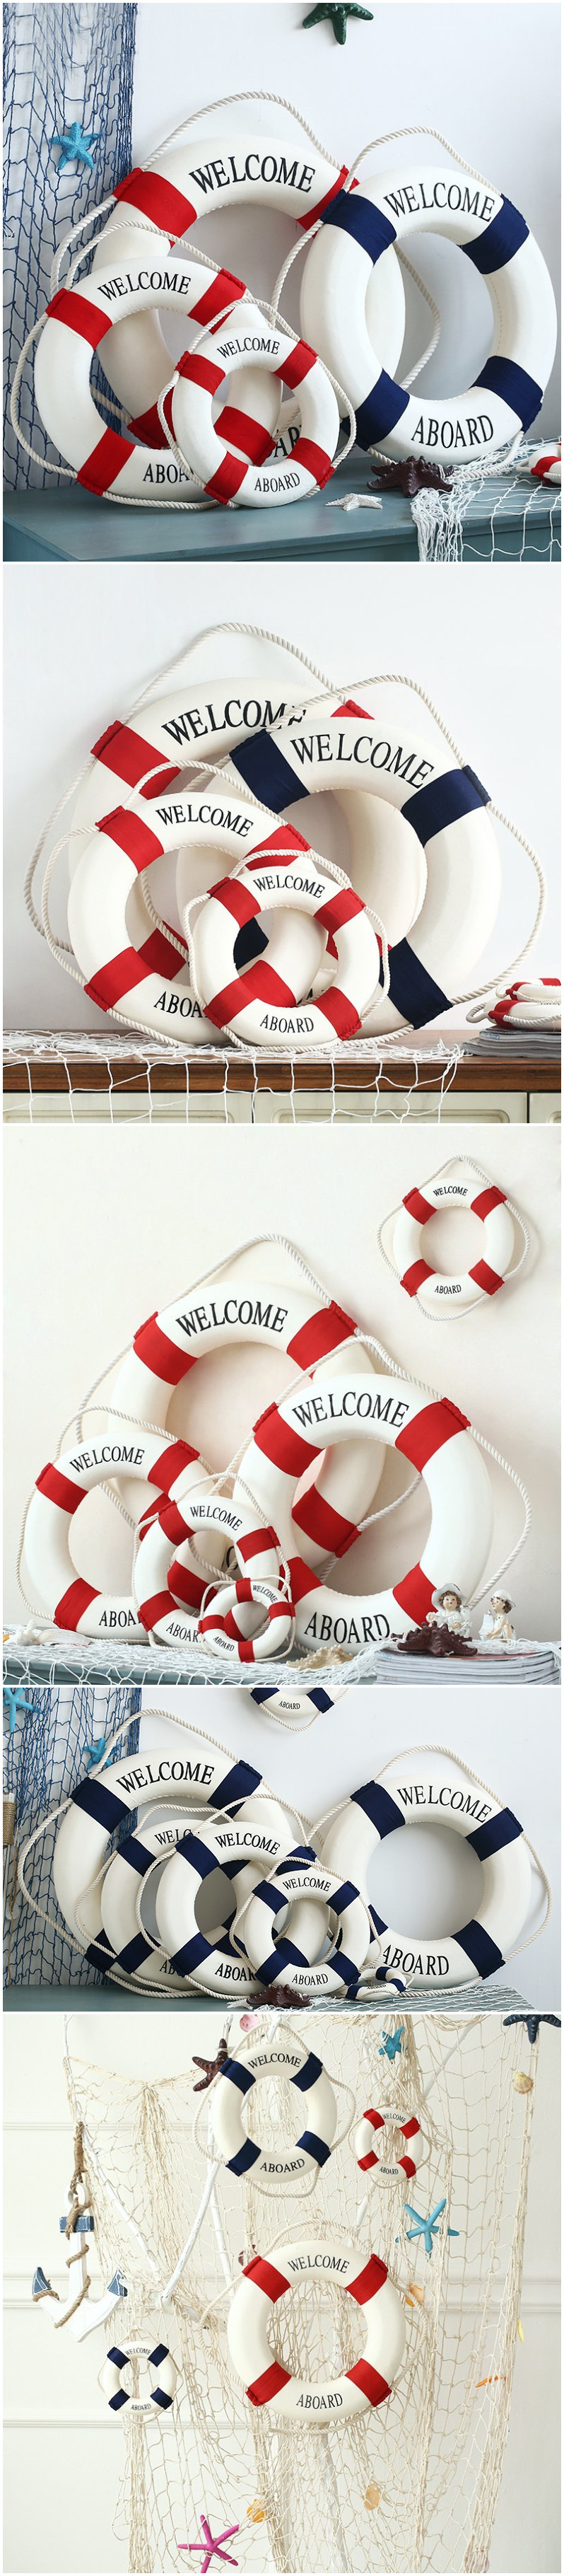 Mediterranean-Style-Welcome-Aboard-Decorative-Life-Buoy-Home-Decor-955200